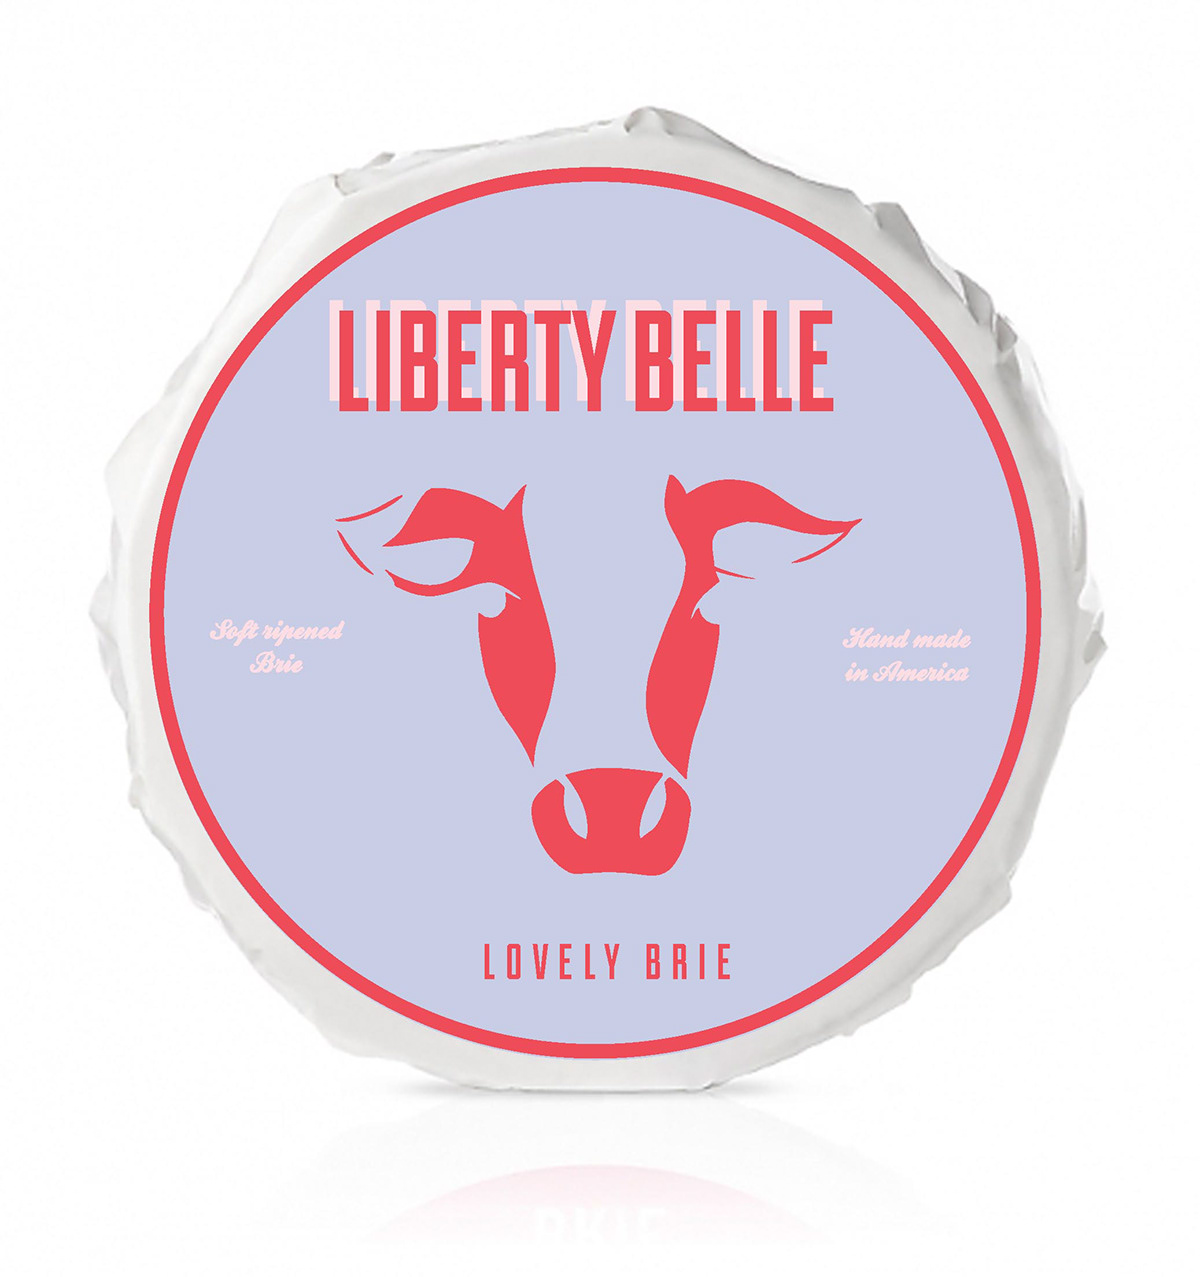 brie liberty belle Belle Liberty cow Cheese box